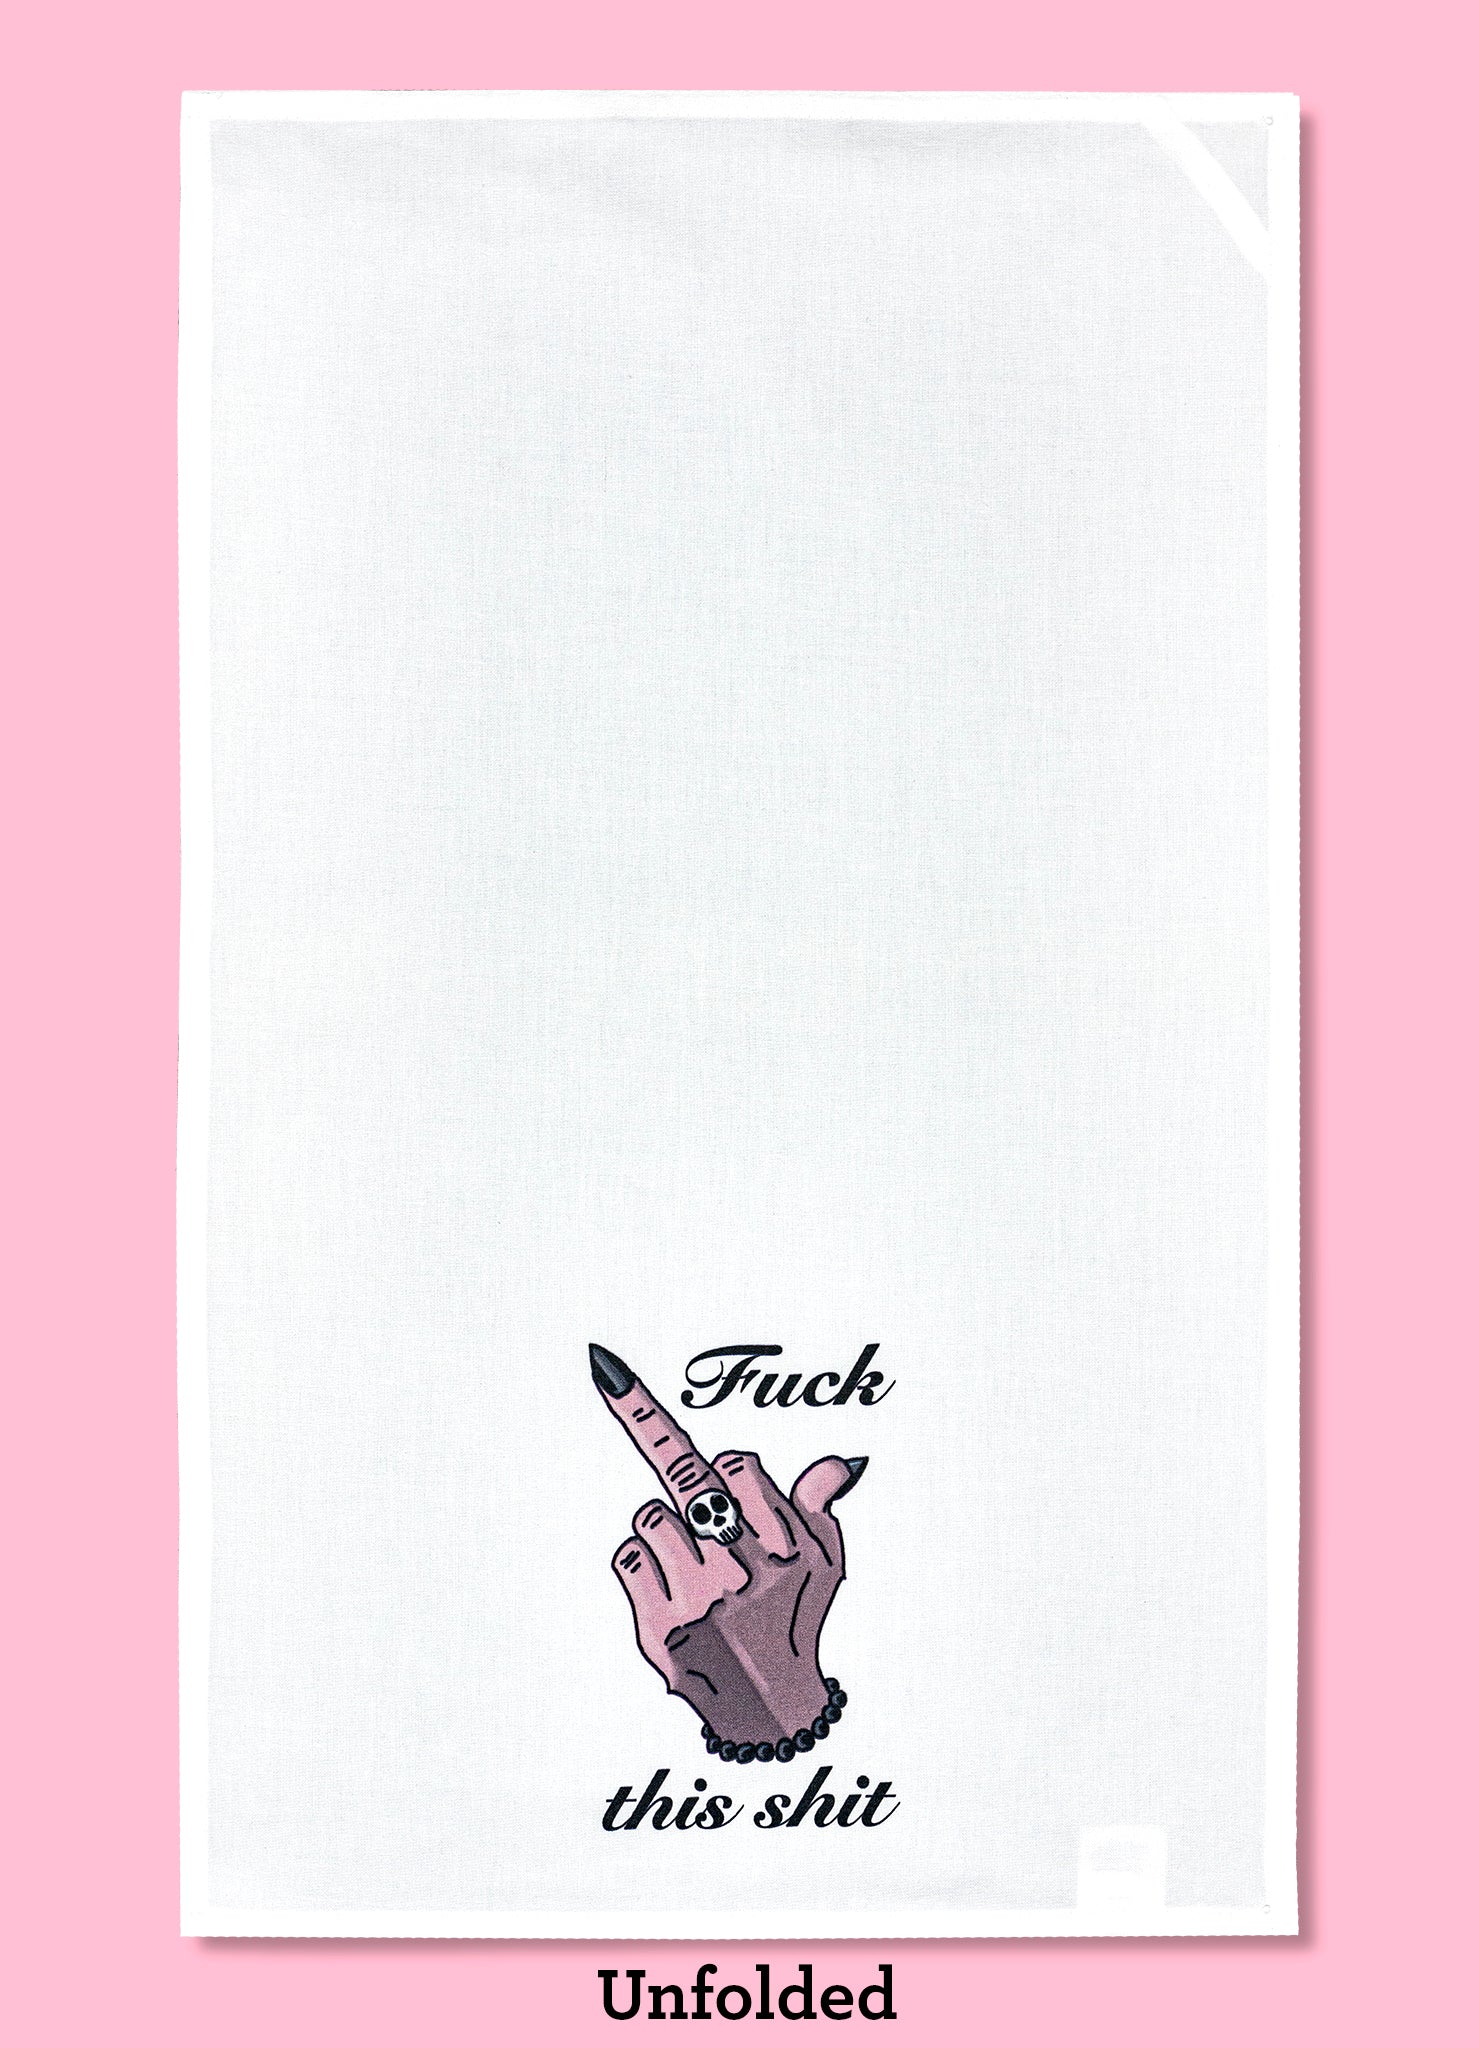 Fuck Around and Find Out funny kitchen towel – Bad Grandma Designs